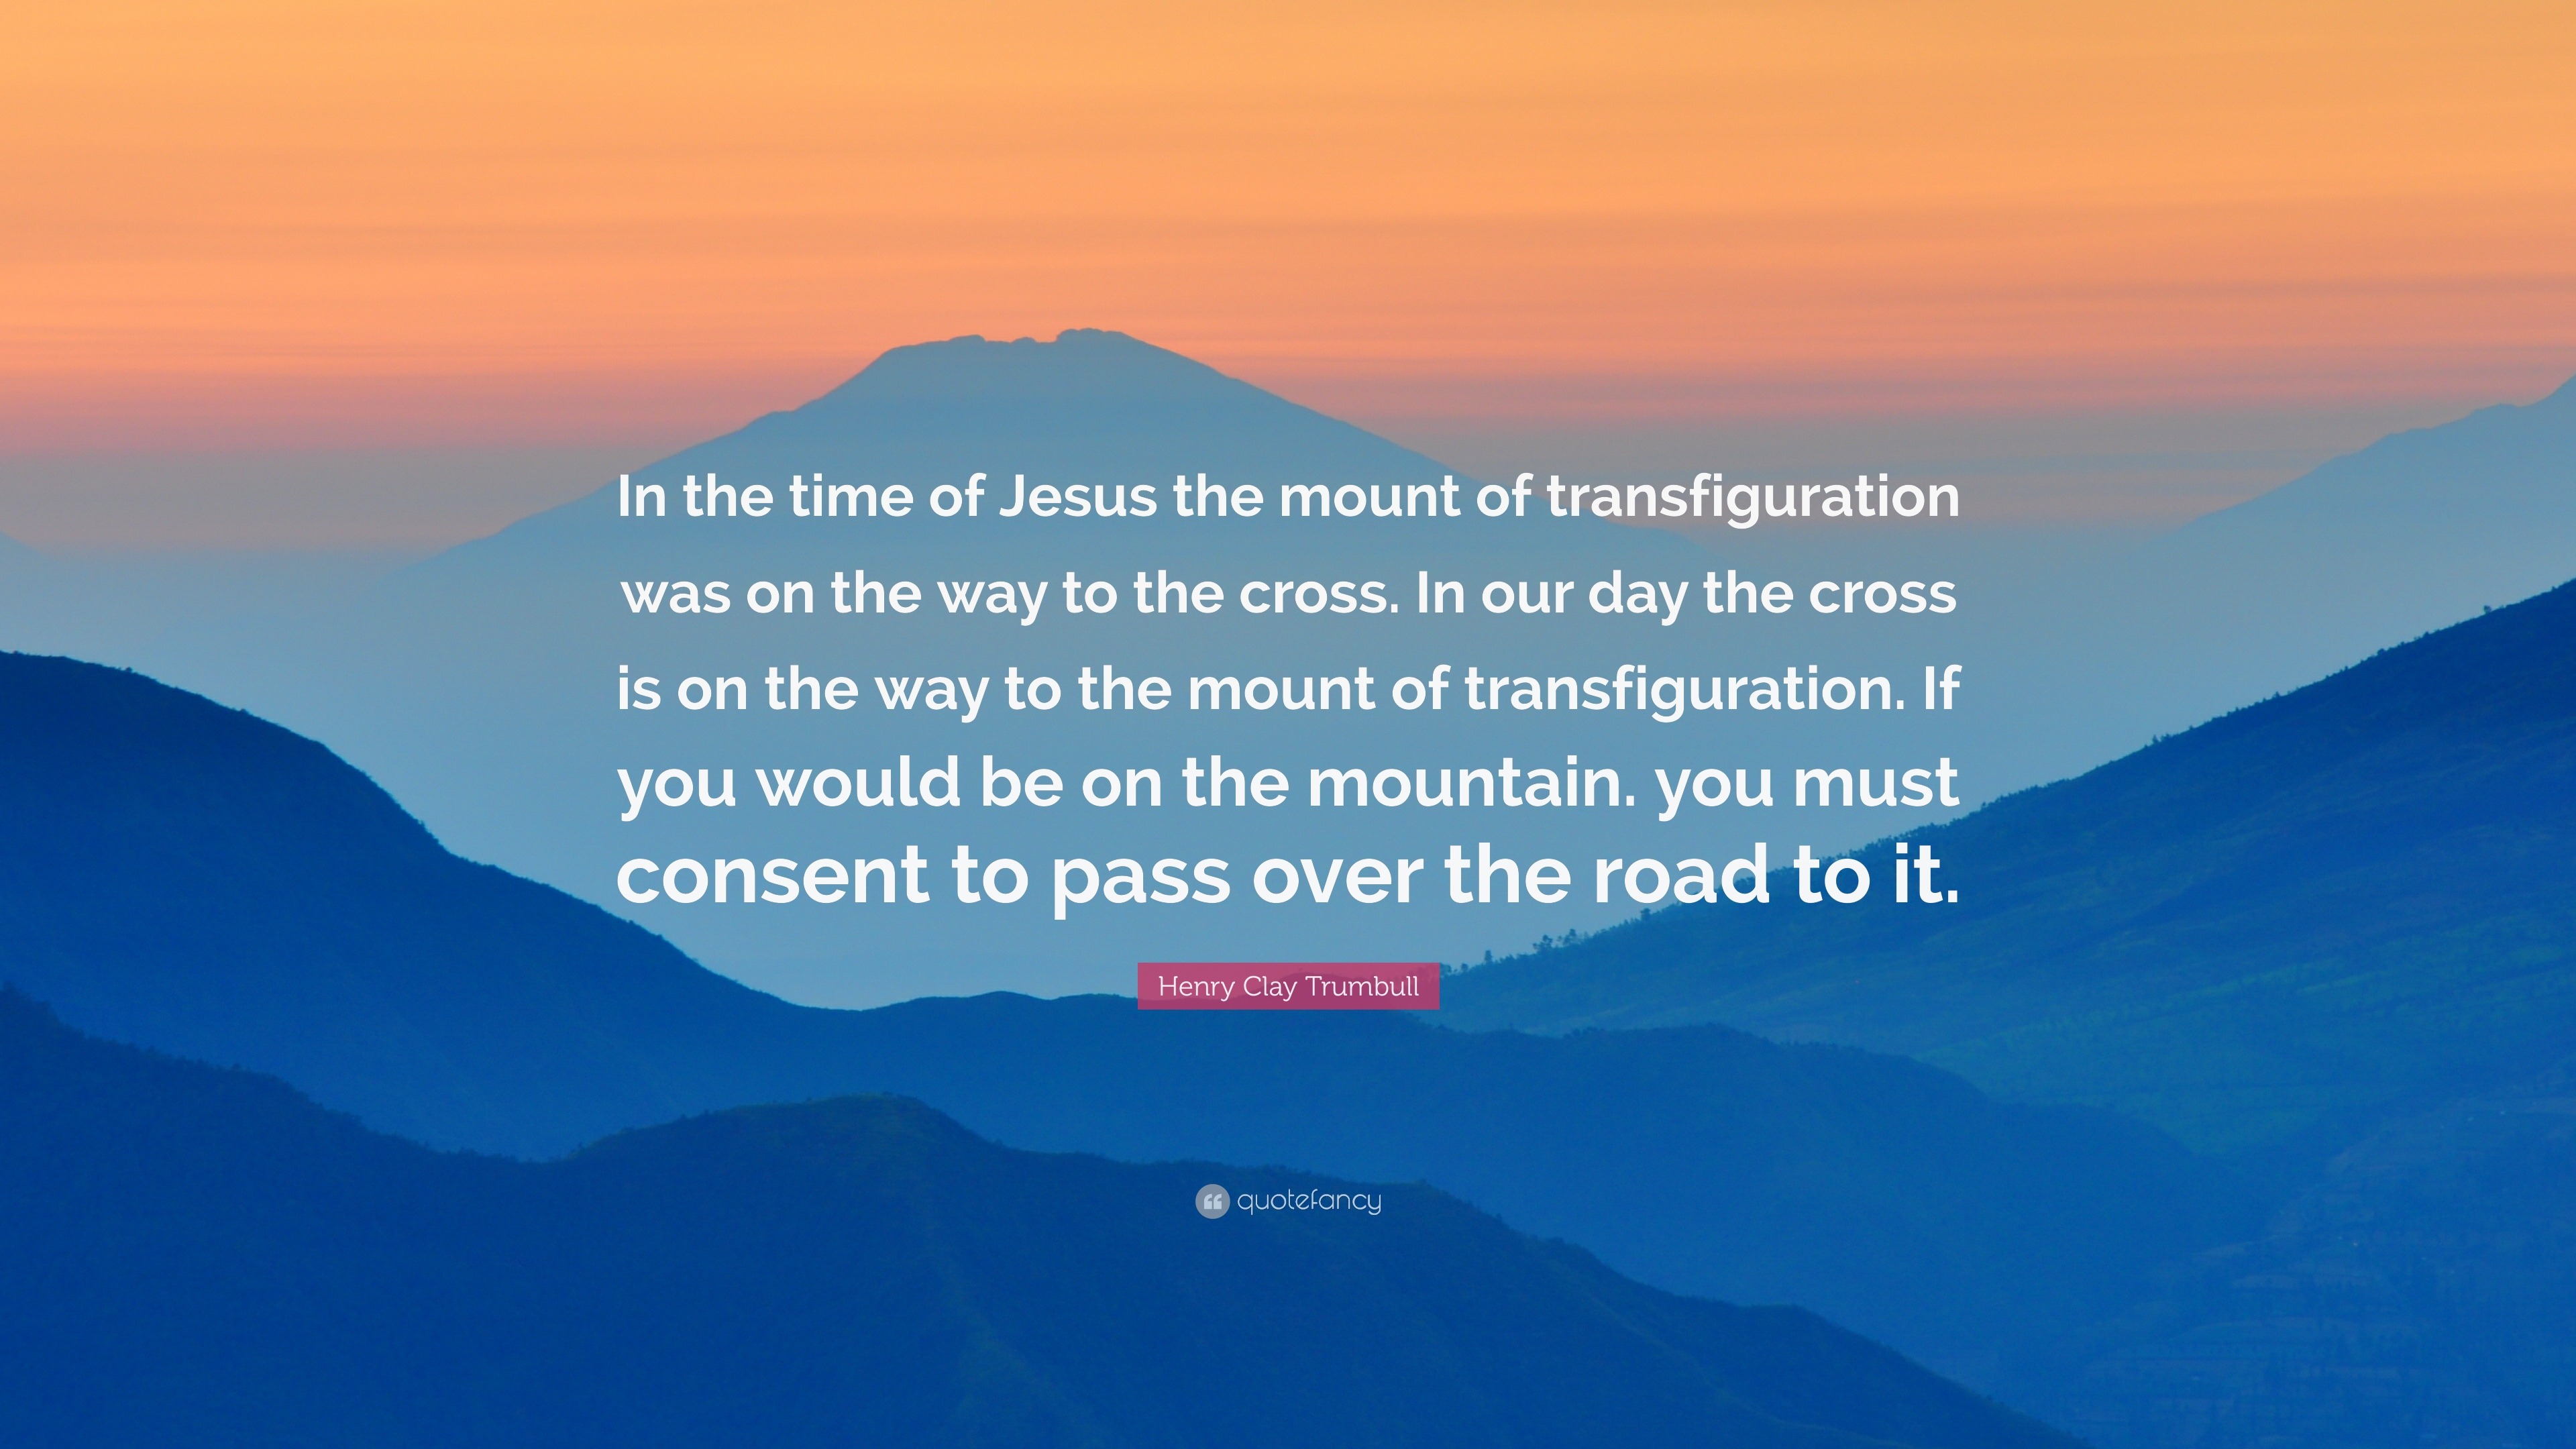 Henry Clay Trumbull Quote “In the time of Jesus the mount of